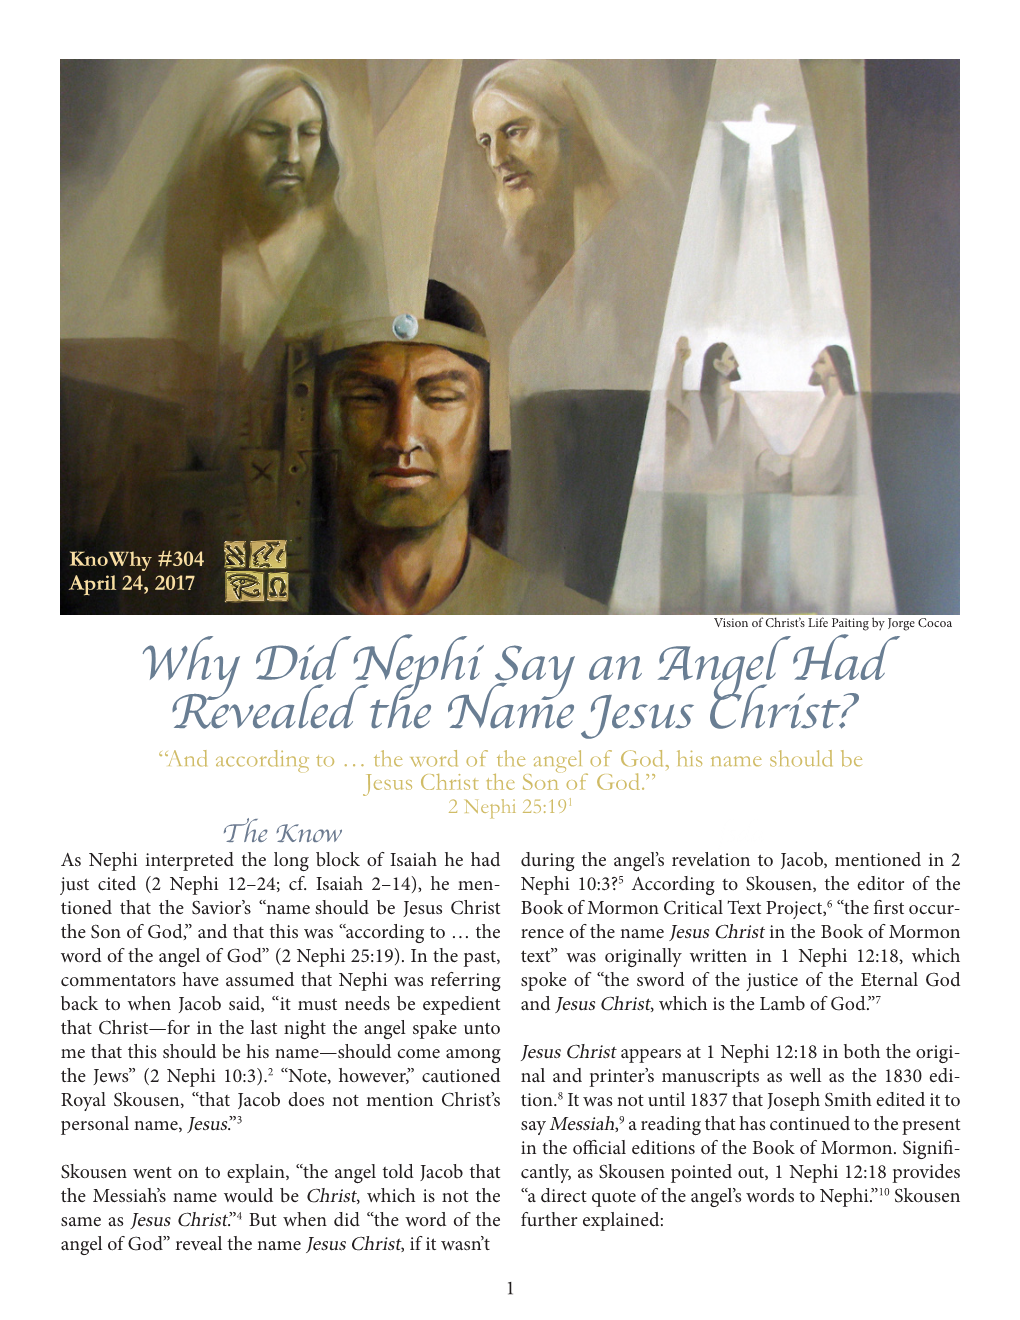 Why Did Nephi Say an Angel Had Revealed the Name Jesus Christ?